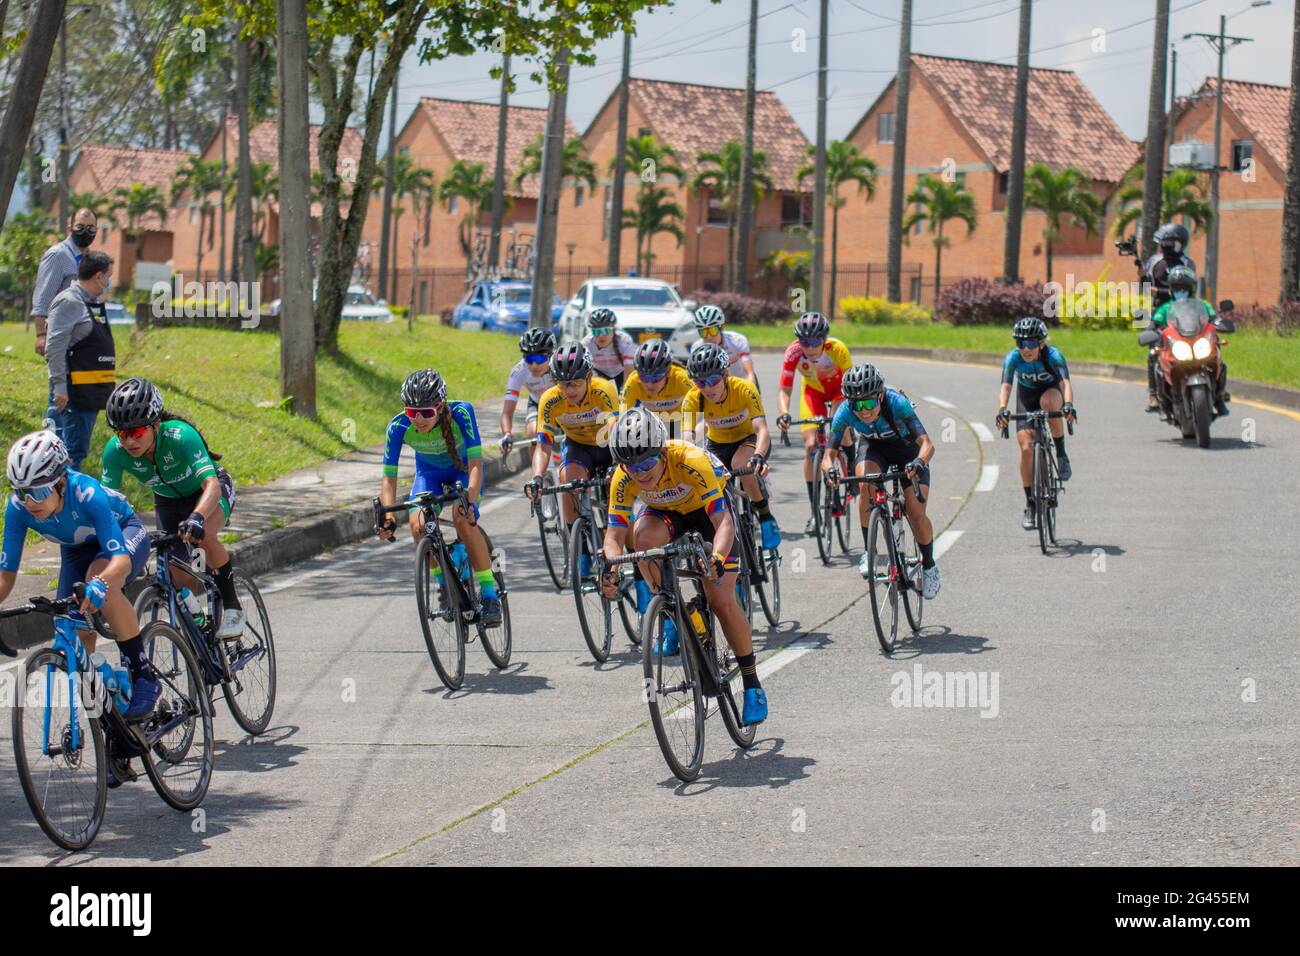 Pereira, Colombia. 18th June, 2021. Cyclists from the Colombia Tierra de Atletas team participate in the Women's Colombian National Road Race Championship in the streets de Pereira, Colombia on June 18, 2021 Credit: Long Visual Press/Alamy Live News Stock Photo